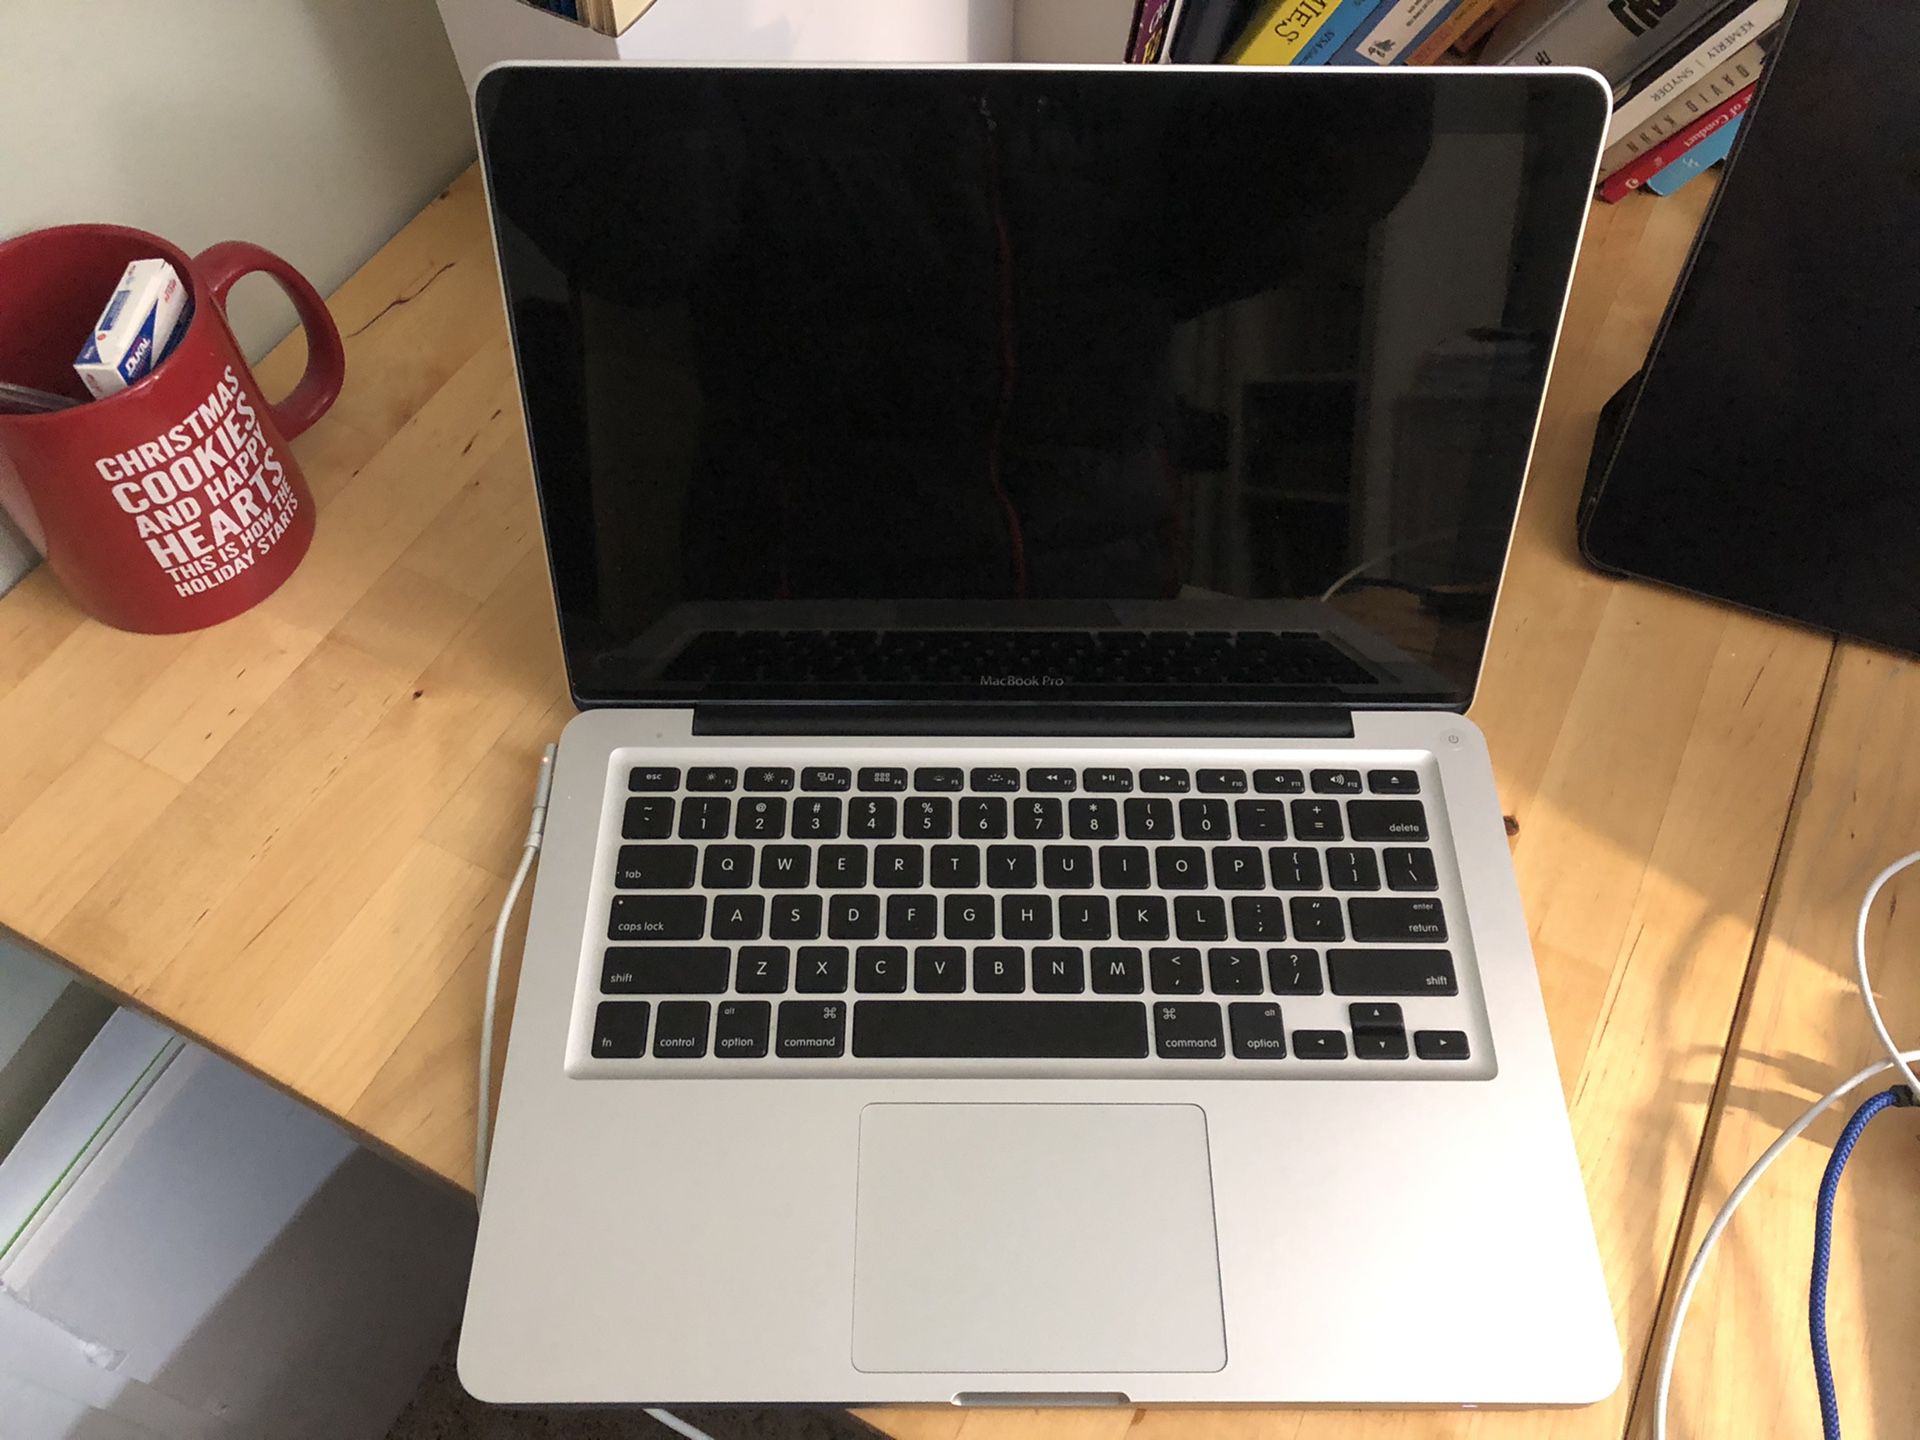 MacBook Pro Mint condition 2011 2.4Ghz core i5 +500gb +16g memory